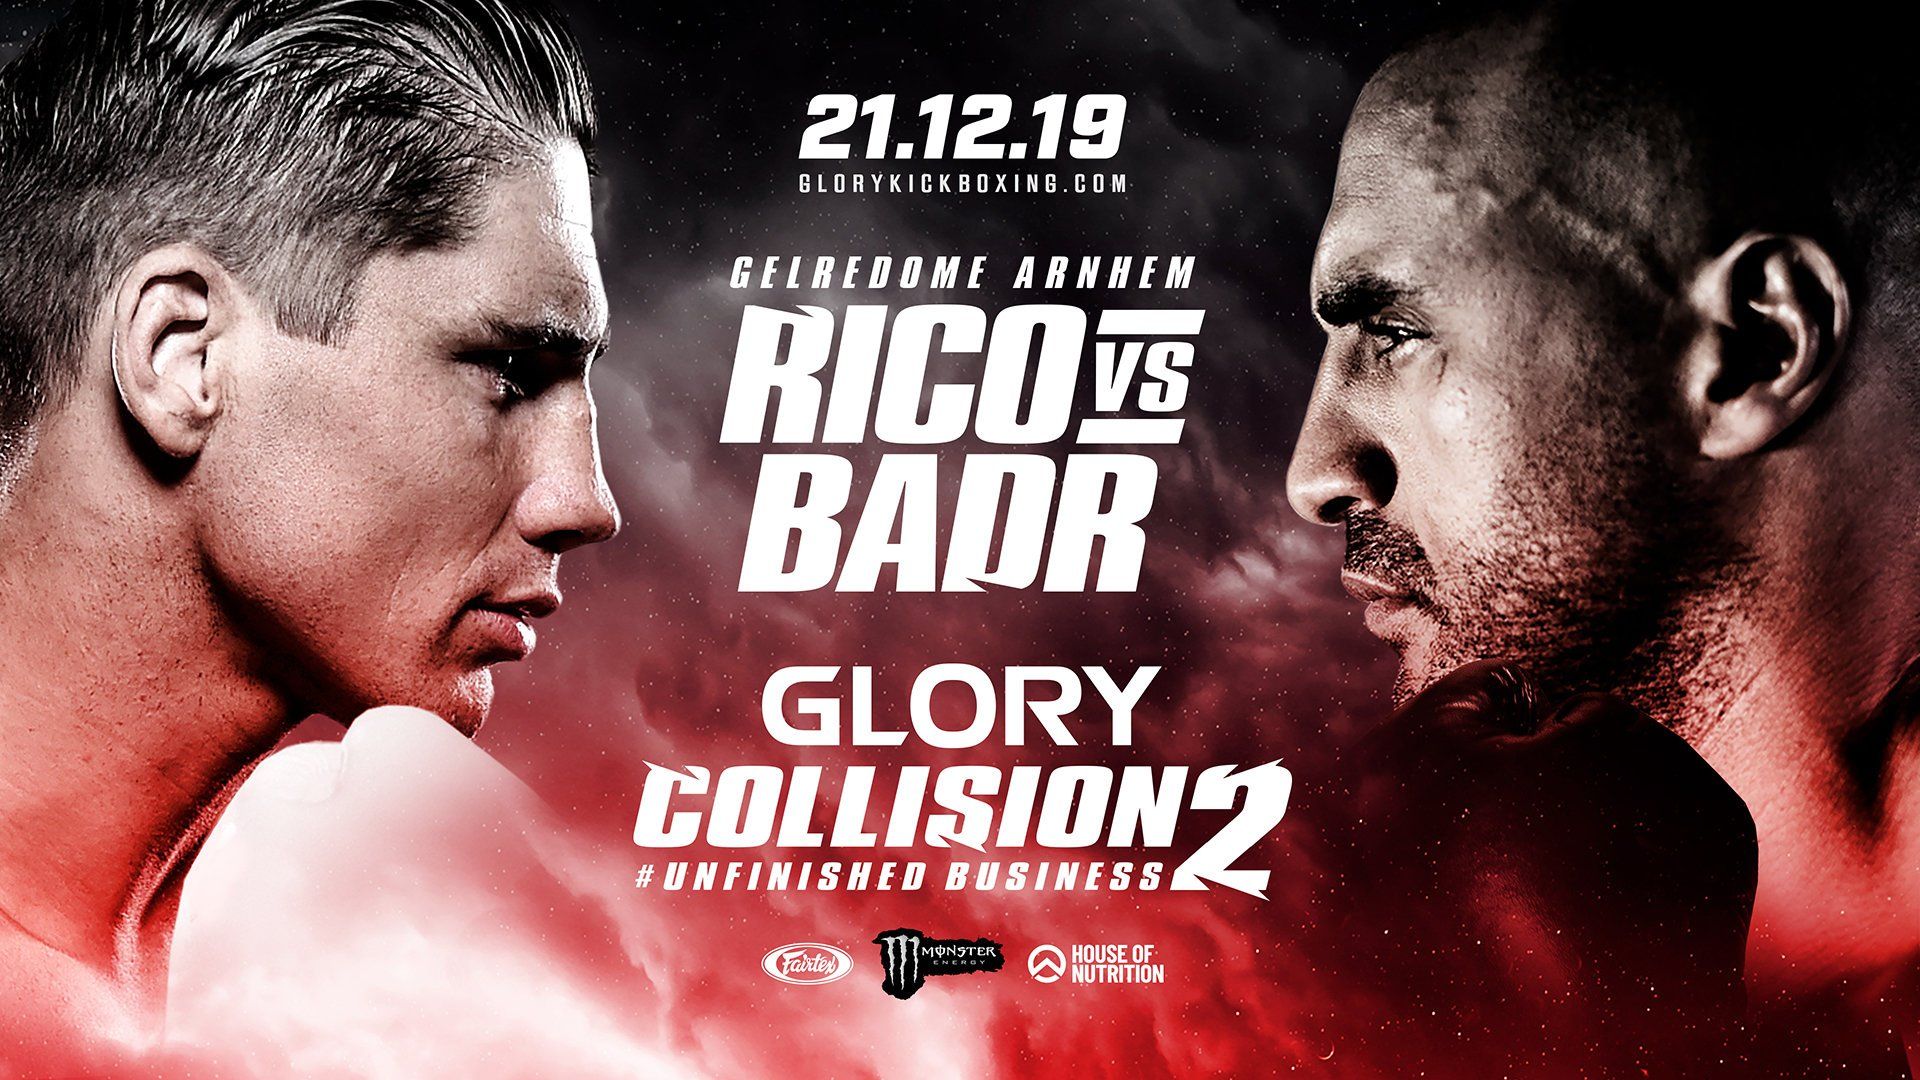 Tickets on general sale this week for Rico vs Badr 2